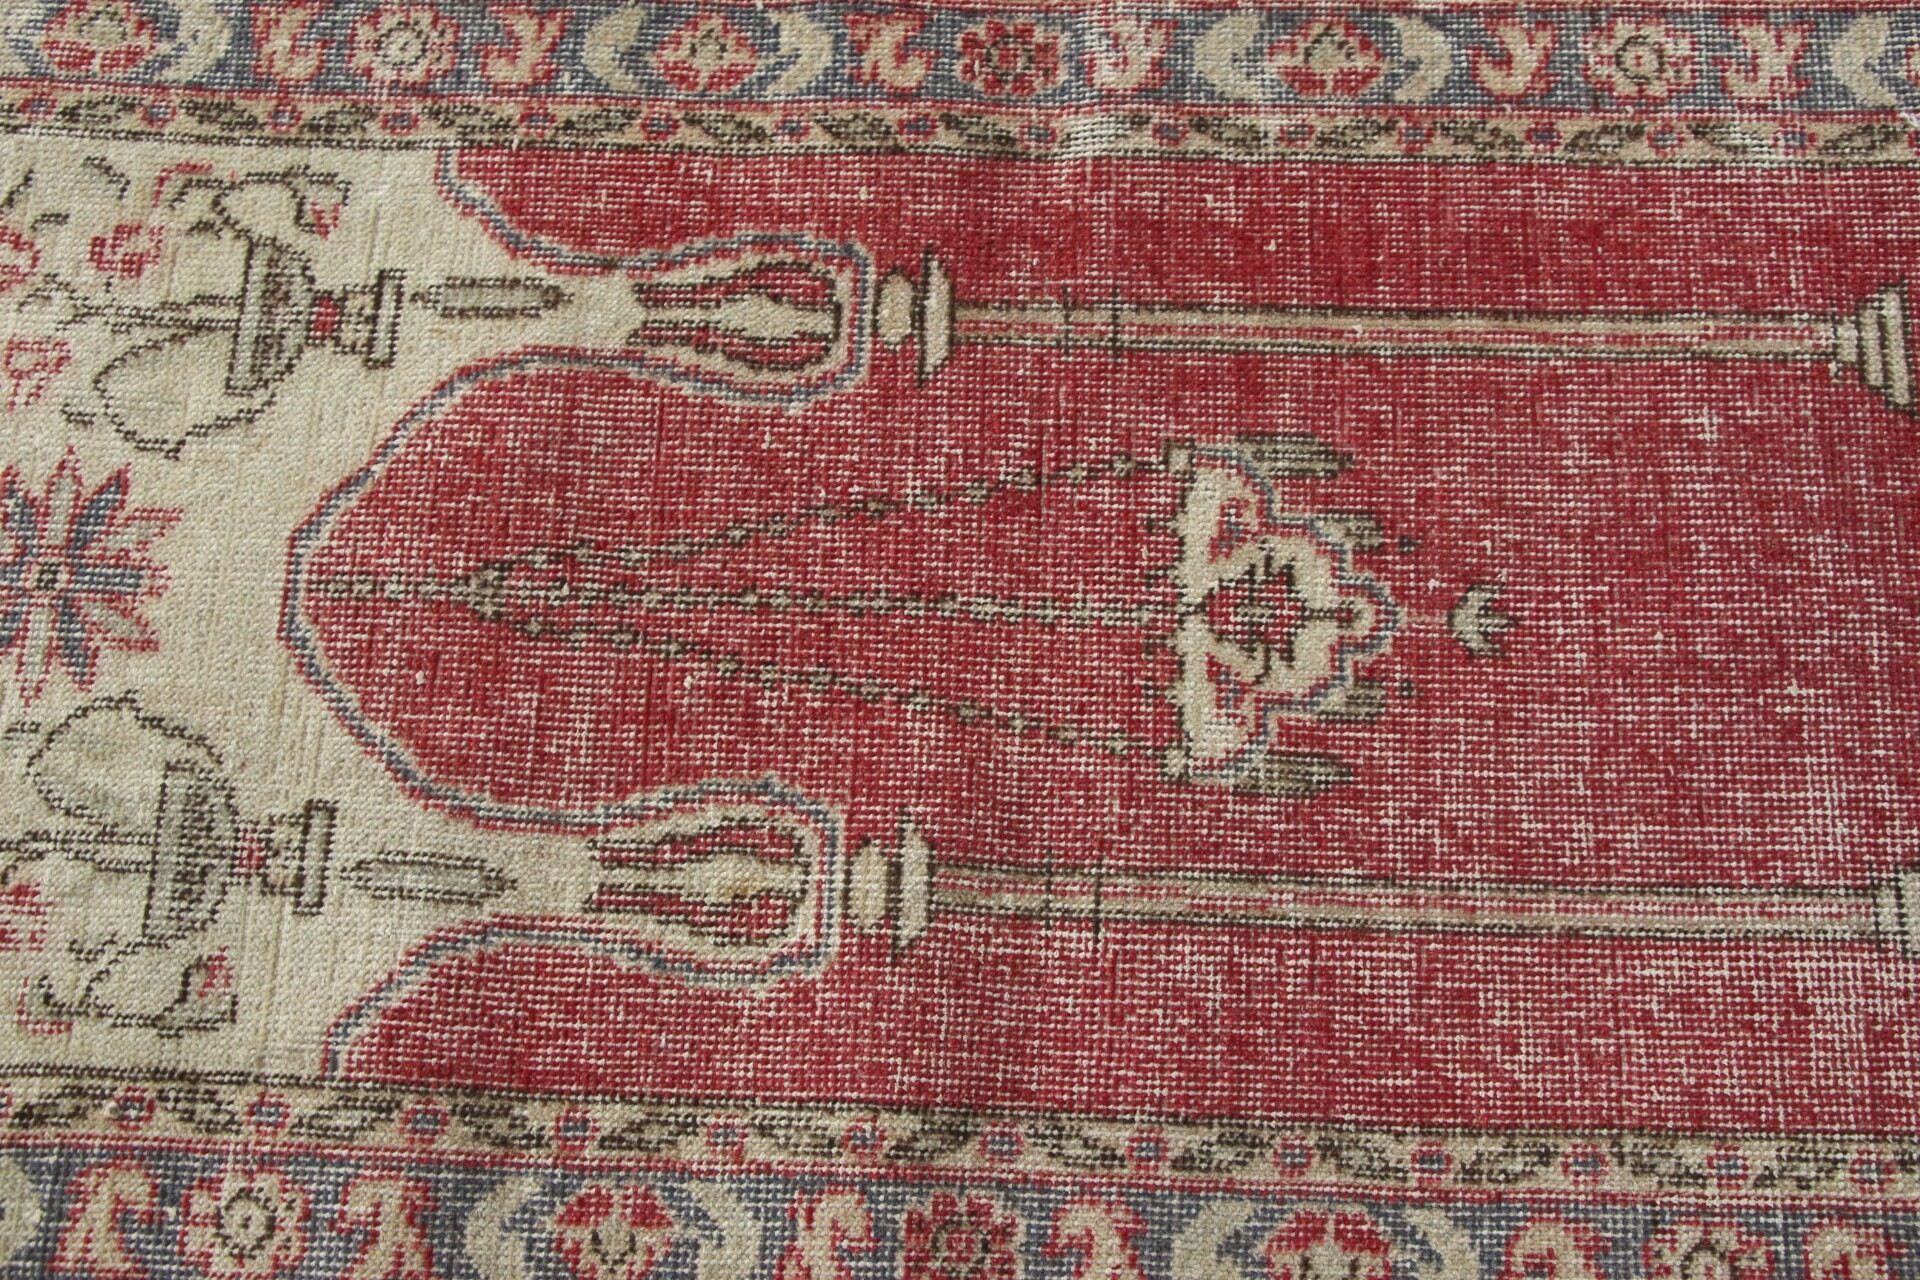 Handwoven Rug, Red Cool Rugs, Rugs for Bath, 2.3x4.6 ft Small Rug, Oriental Rugs, Bathroom Rug, Turkish Rugs, Home Decor Rugs, Vintage Rugs